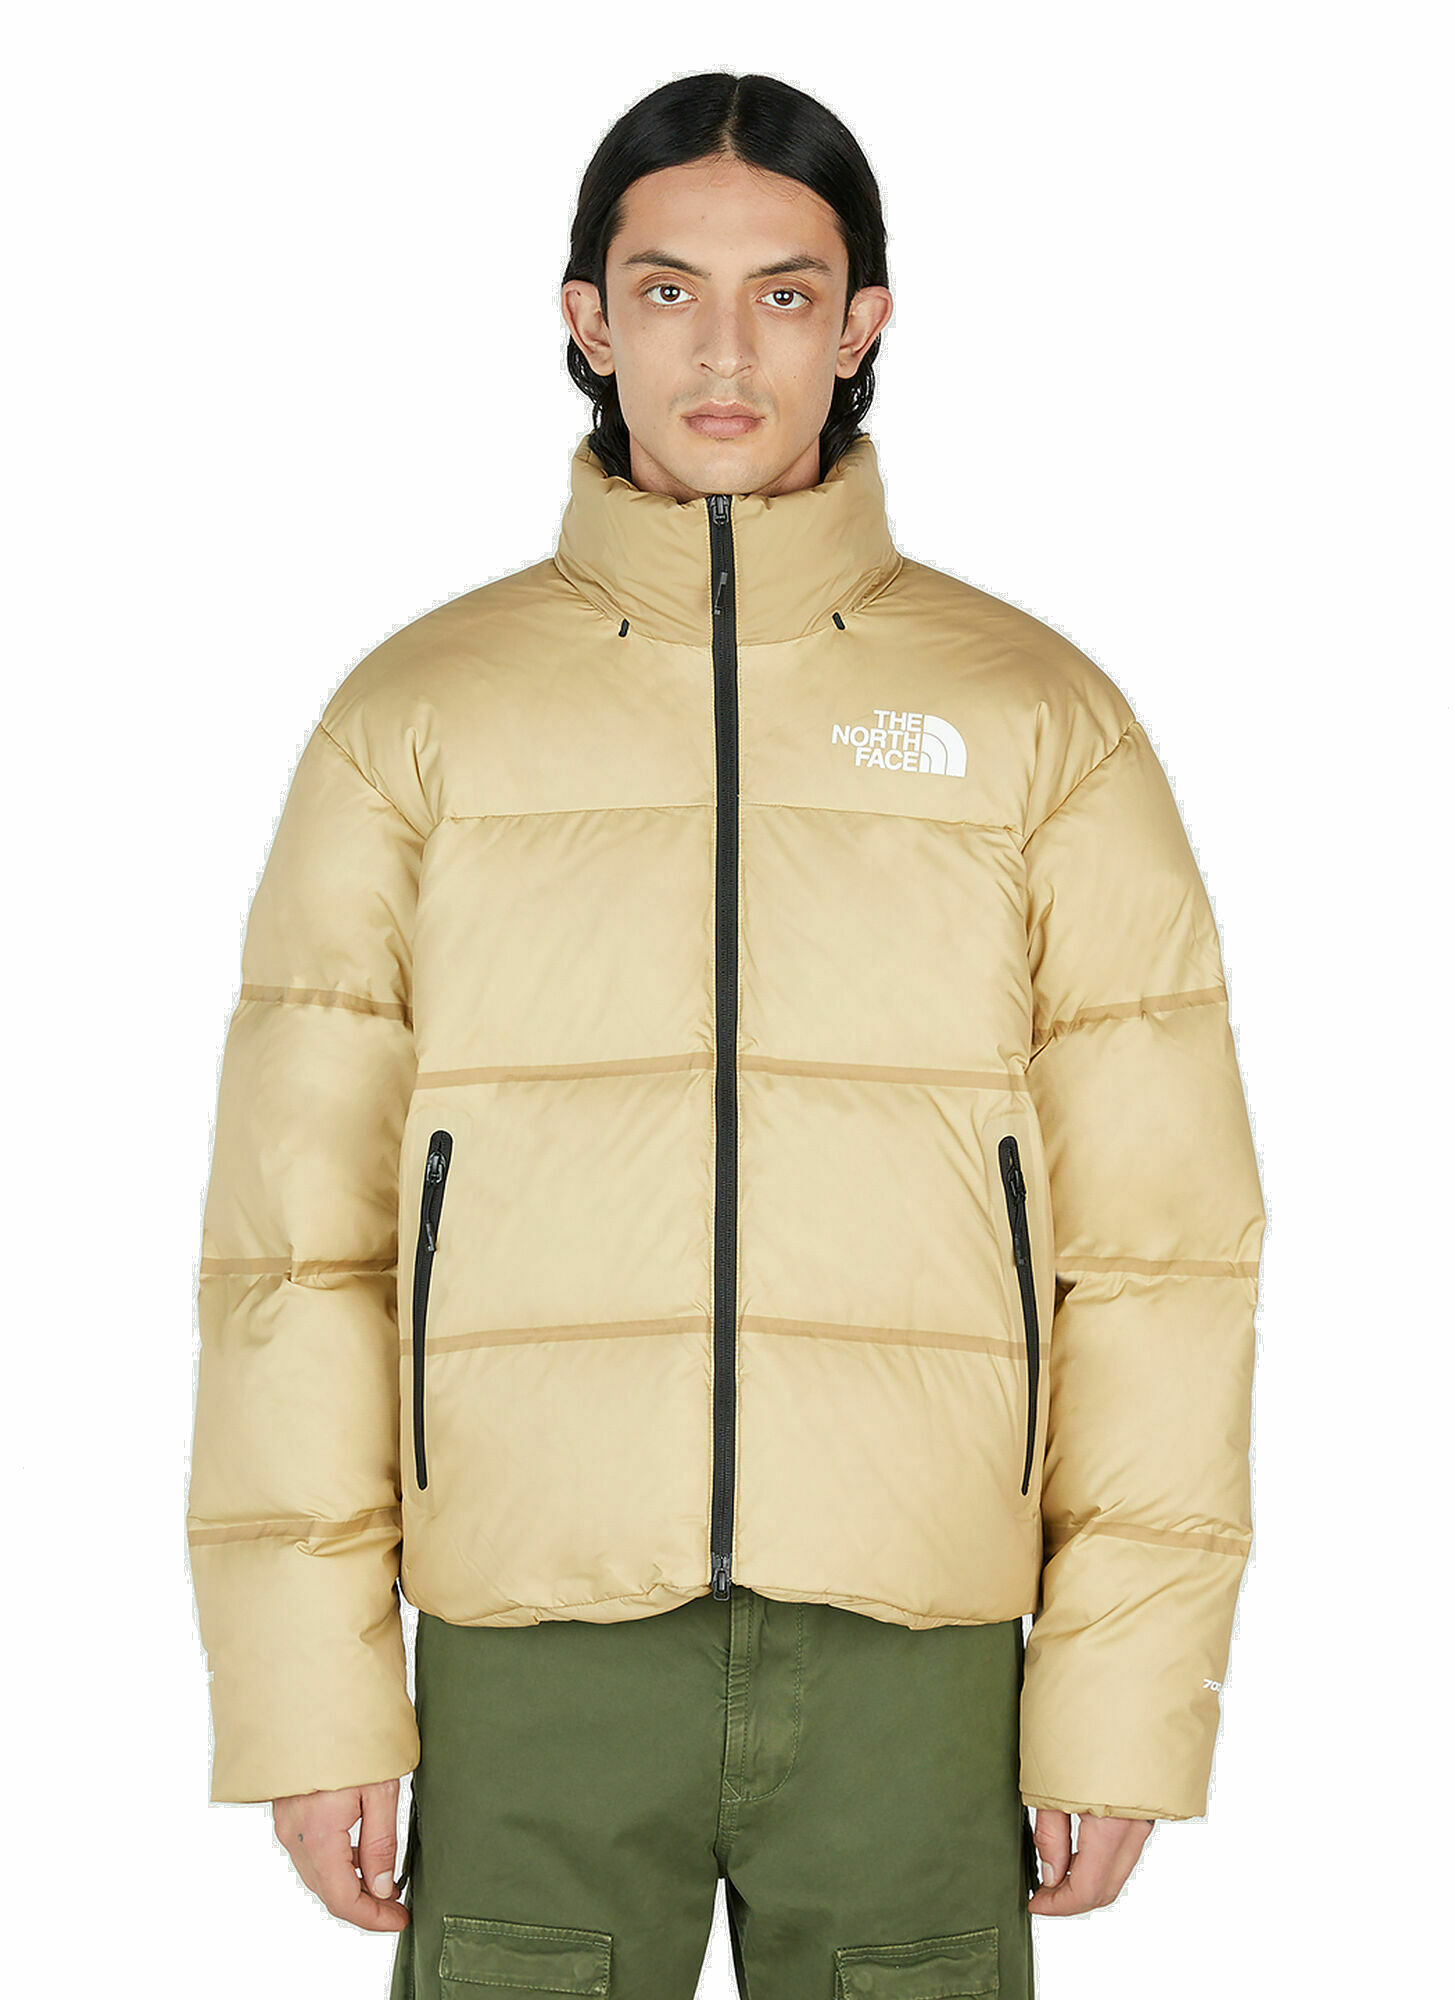 The North Face - RMST Nuptse Jacket in Beige The North Face